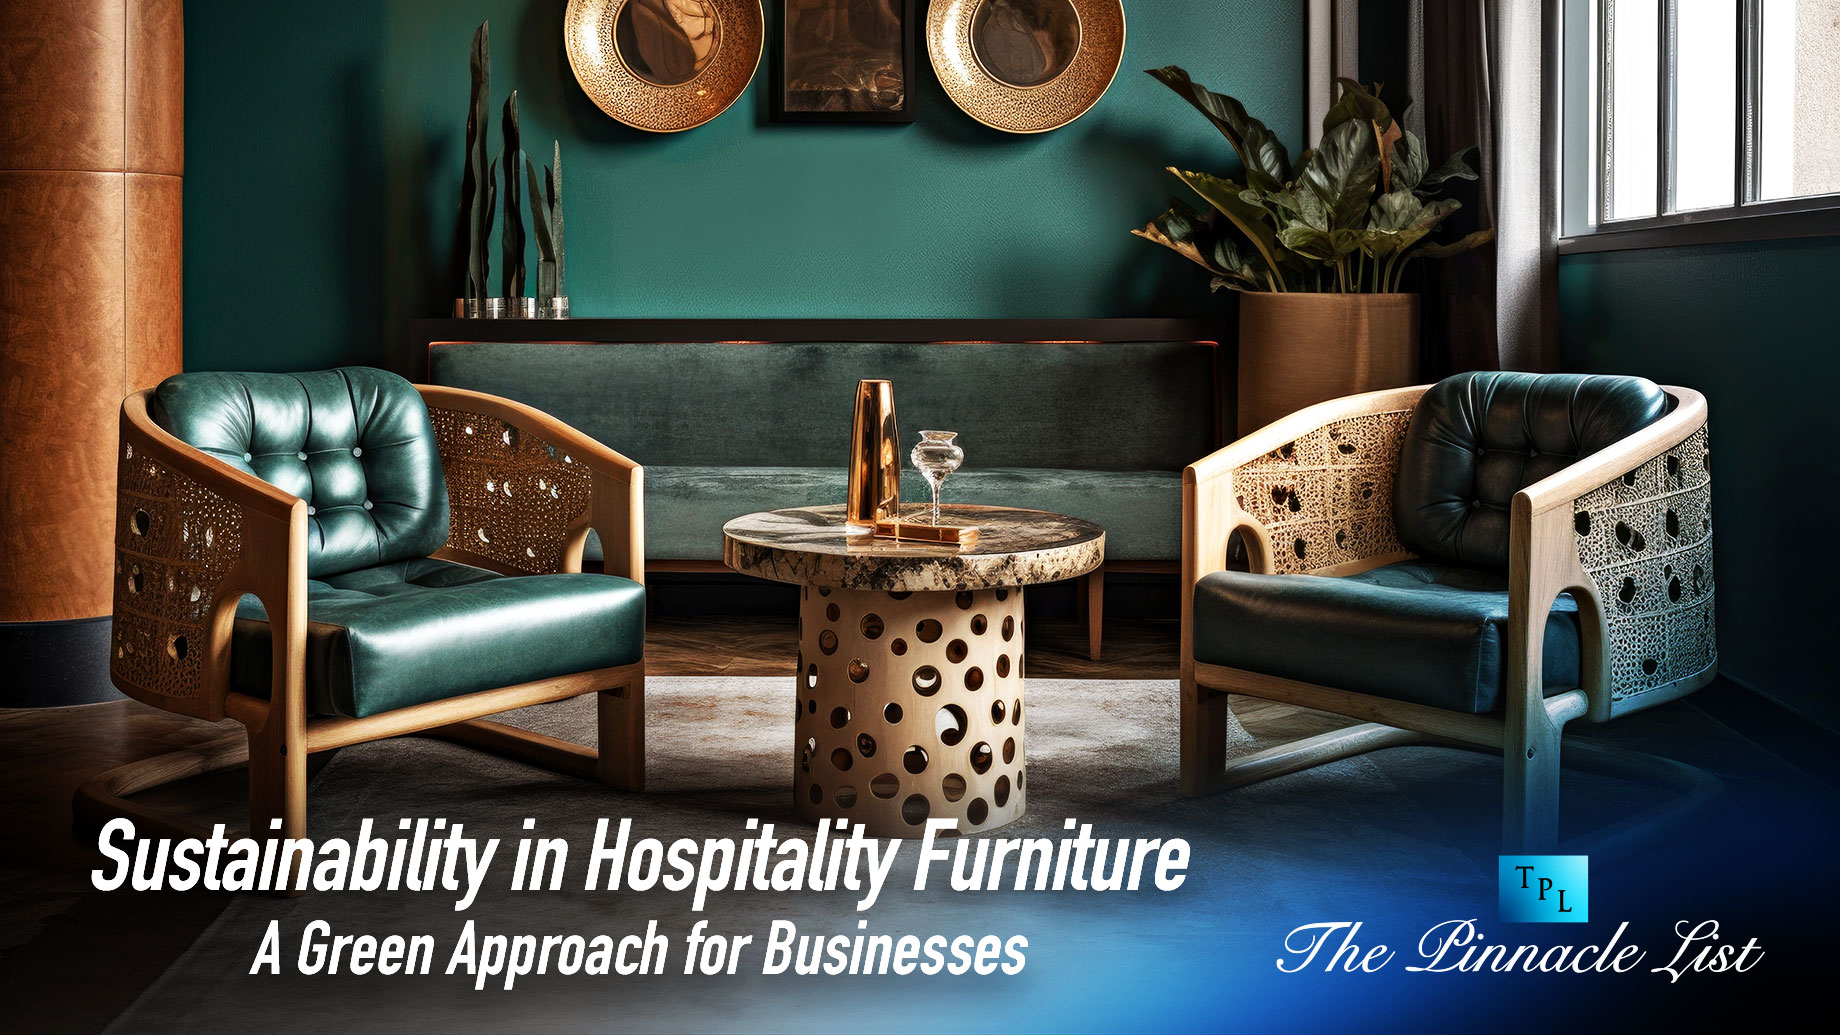 Sustainability in Hospitality Furniture: A Green Approach for Businesses